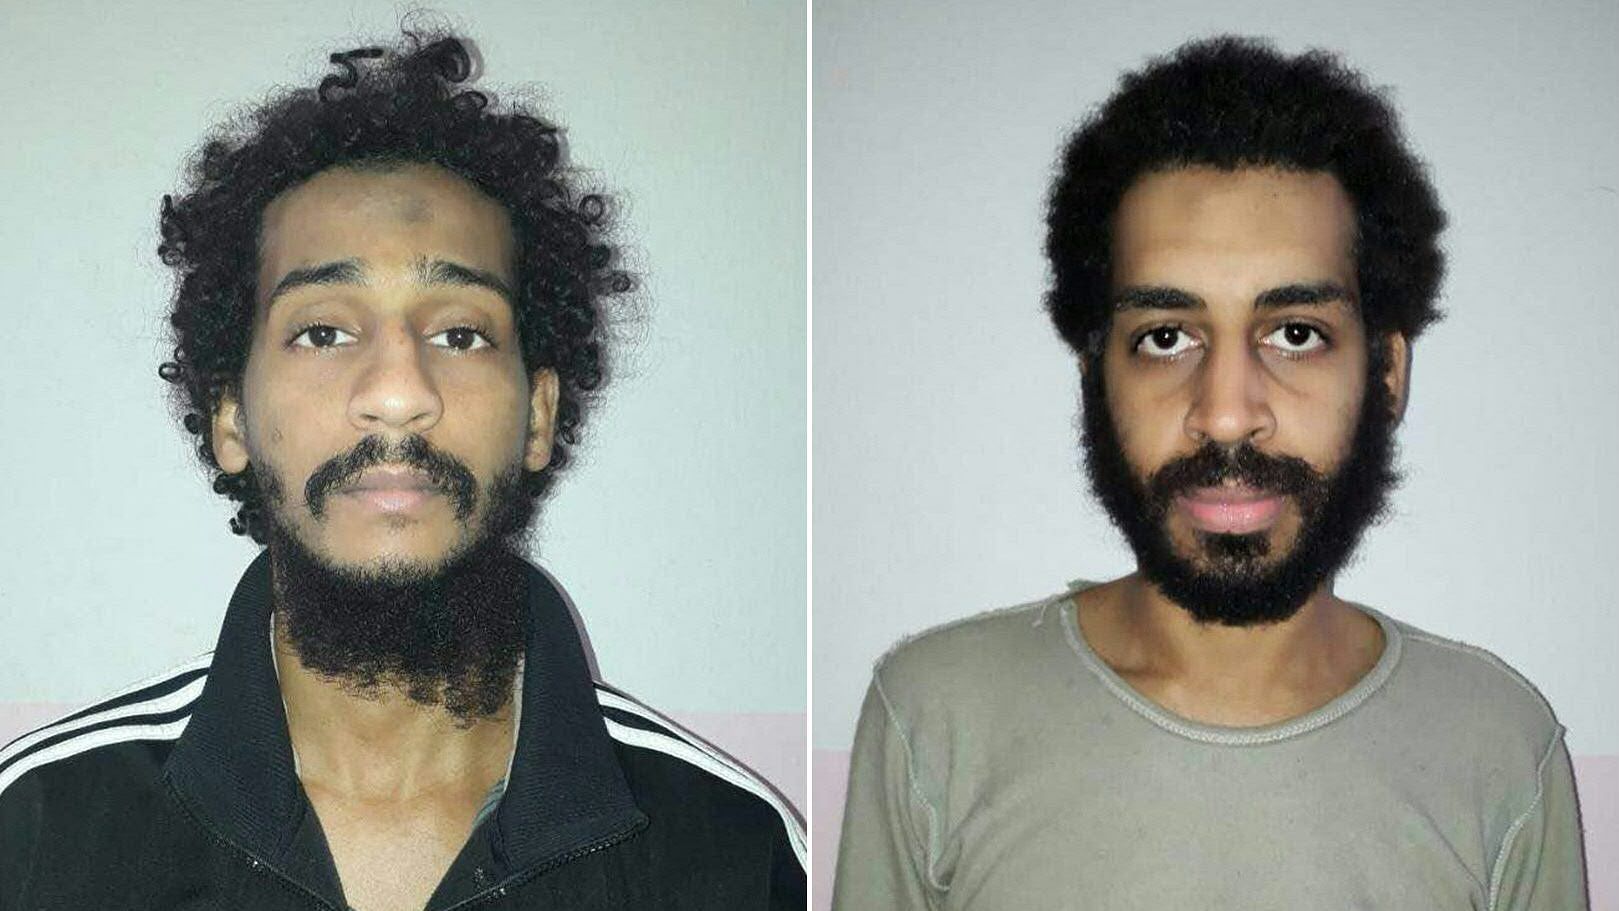 captured British Islamic State (IS) group fighters El Shafee el-Sheikh (L) and Alexanda Kotey (R), posing for mugshots in an undisclosed location. Credit: SDF handout Photo via AFP